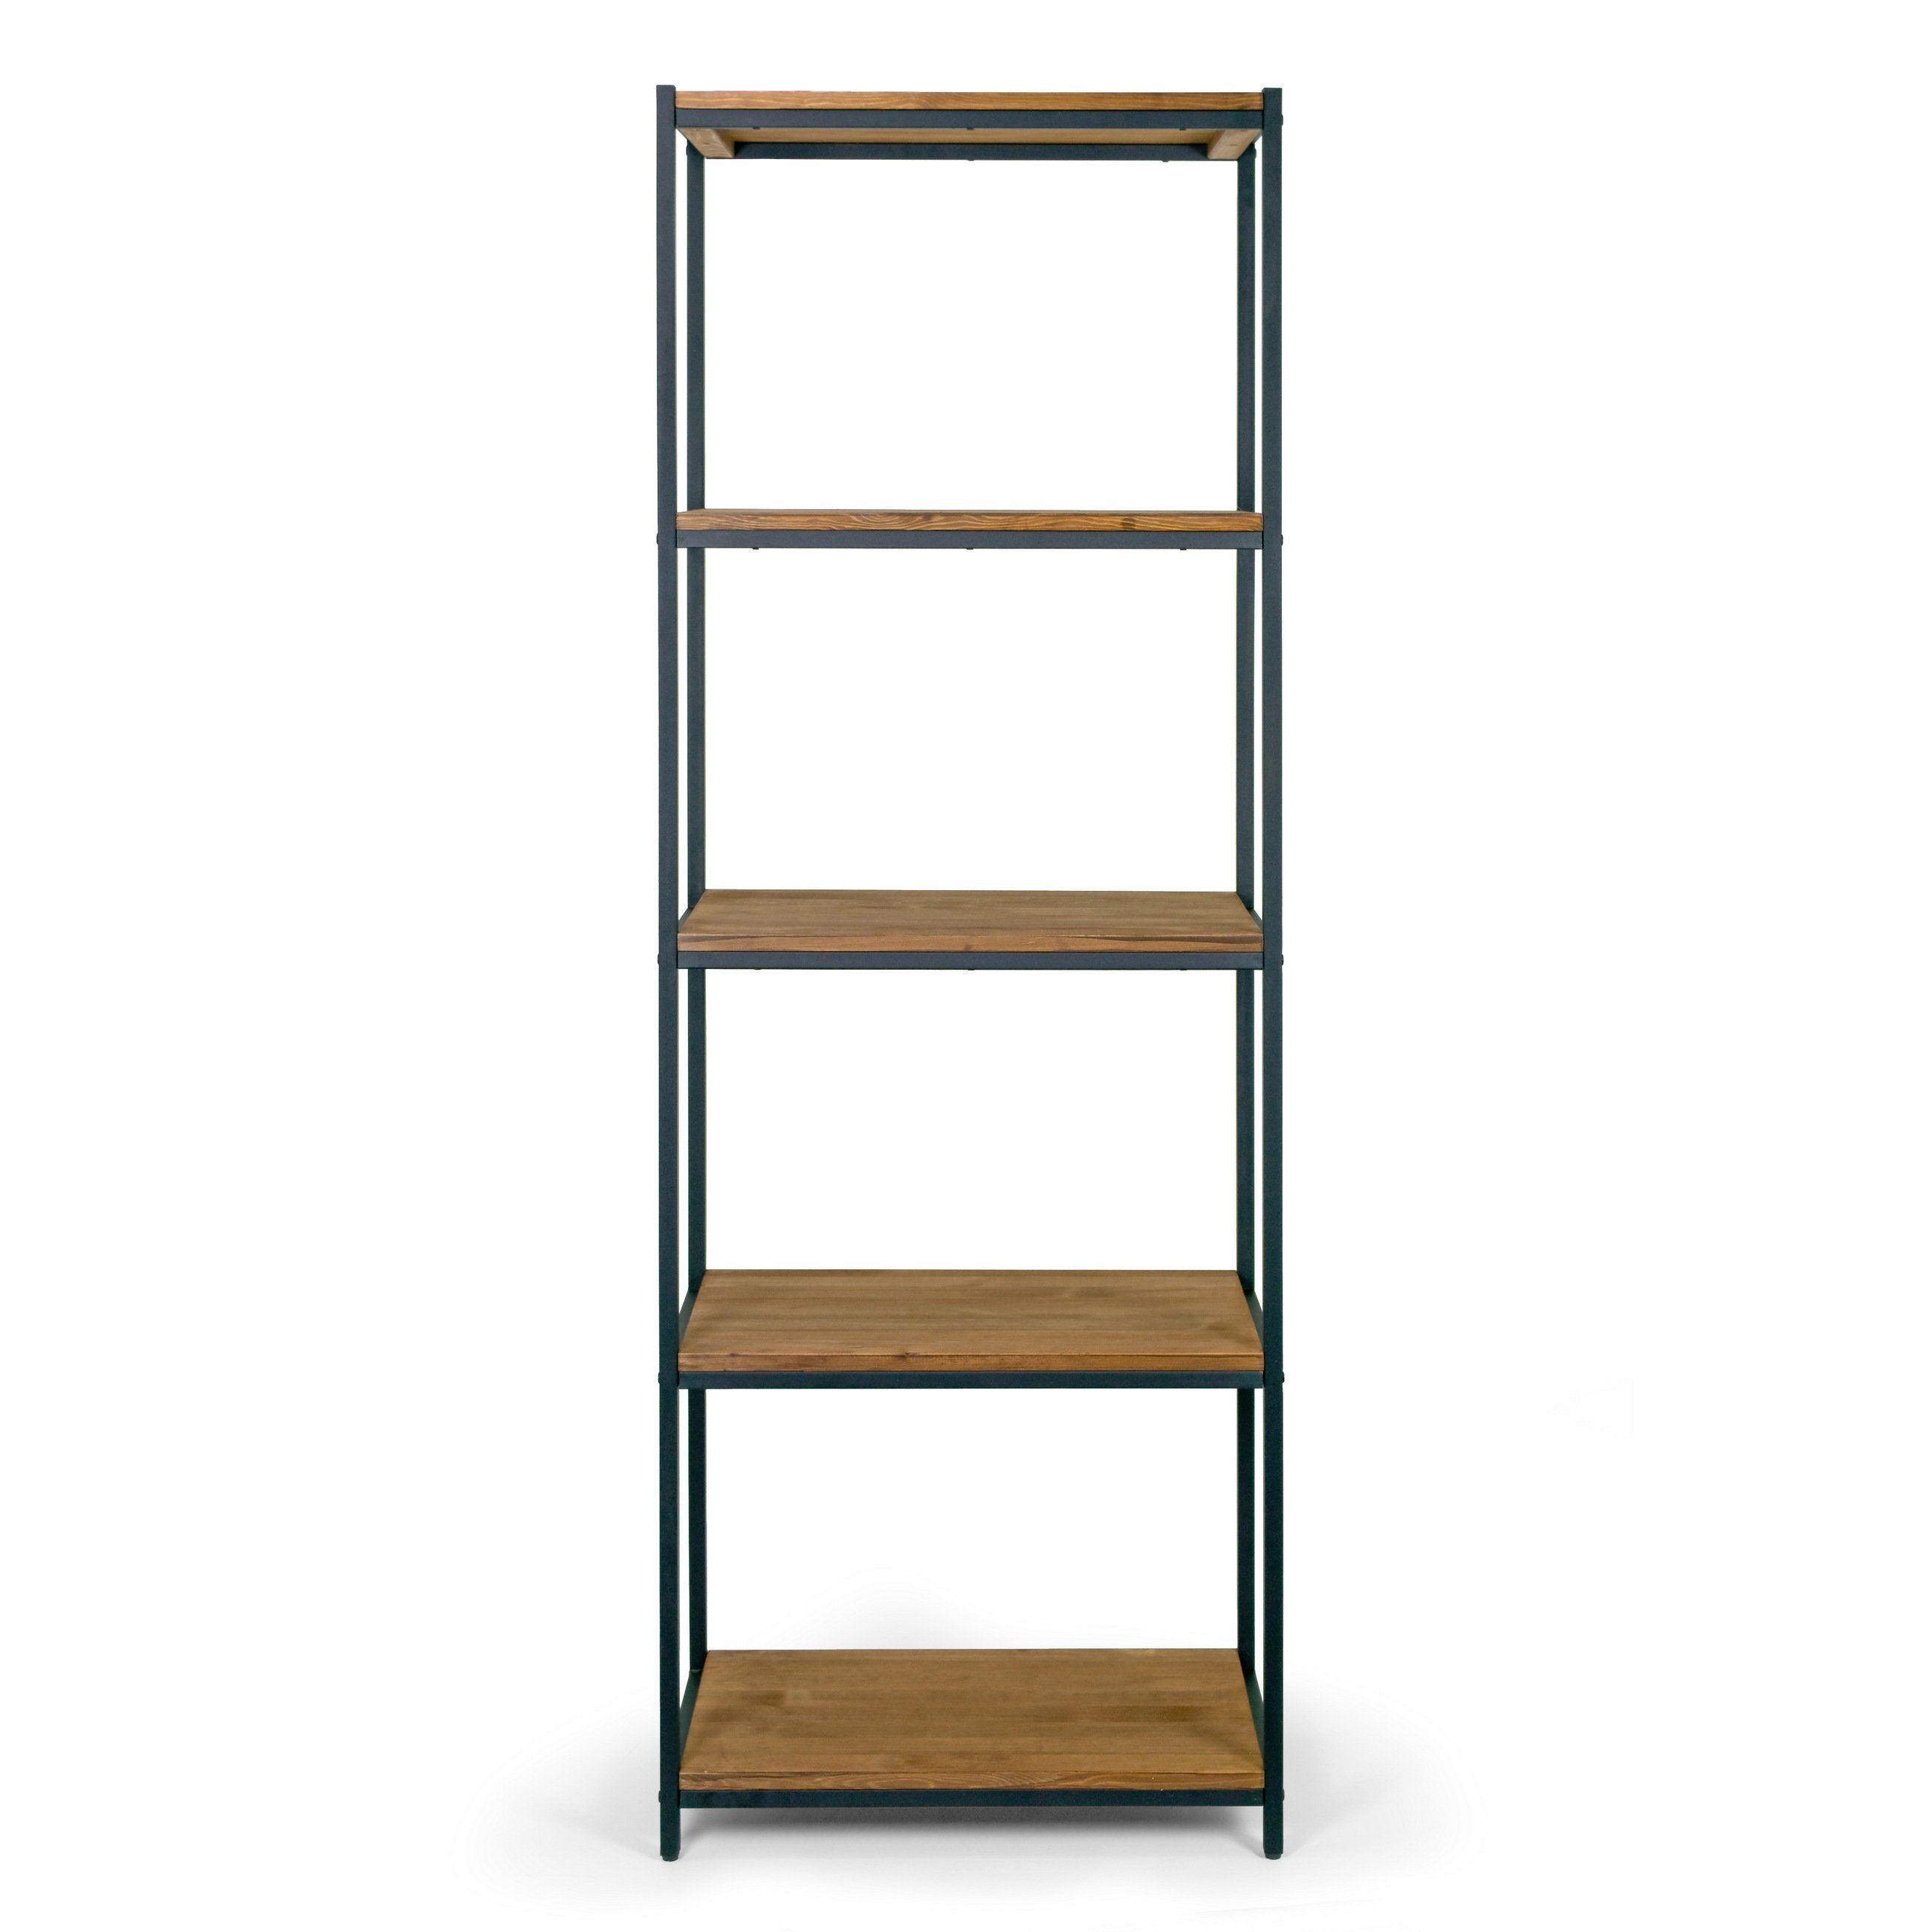 Champney Etagere Bookcase Within Trendy Champney Etagere Bookcases (View 10 of 20)